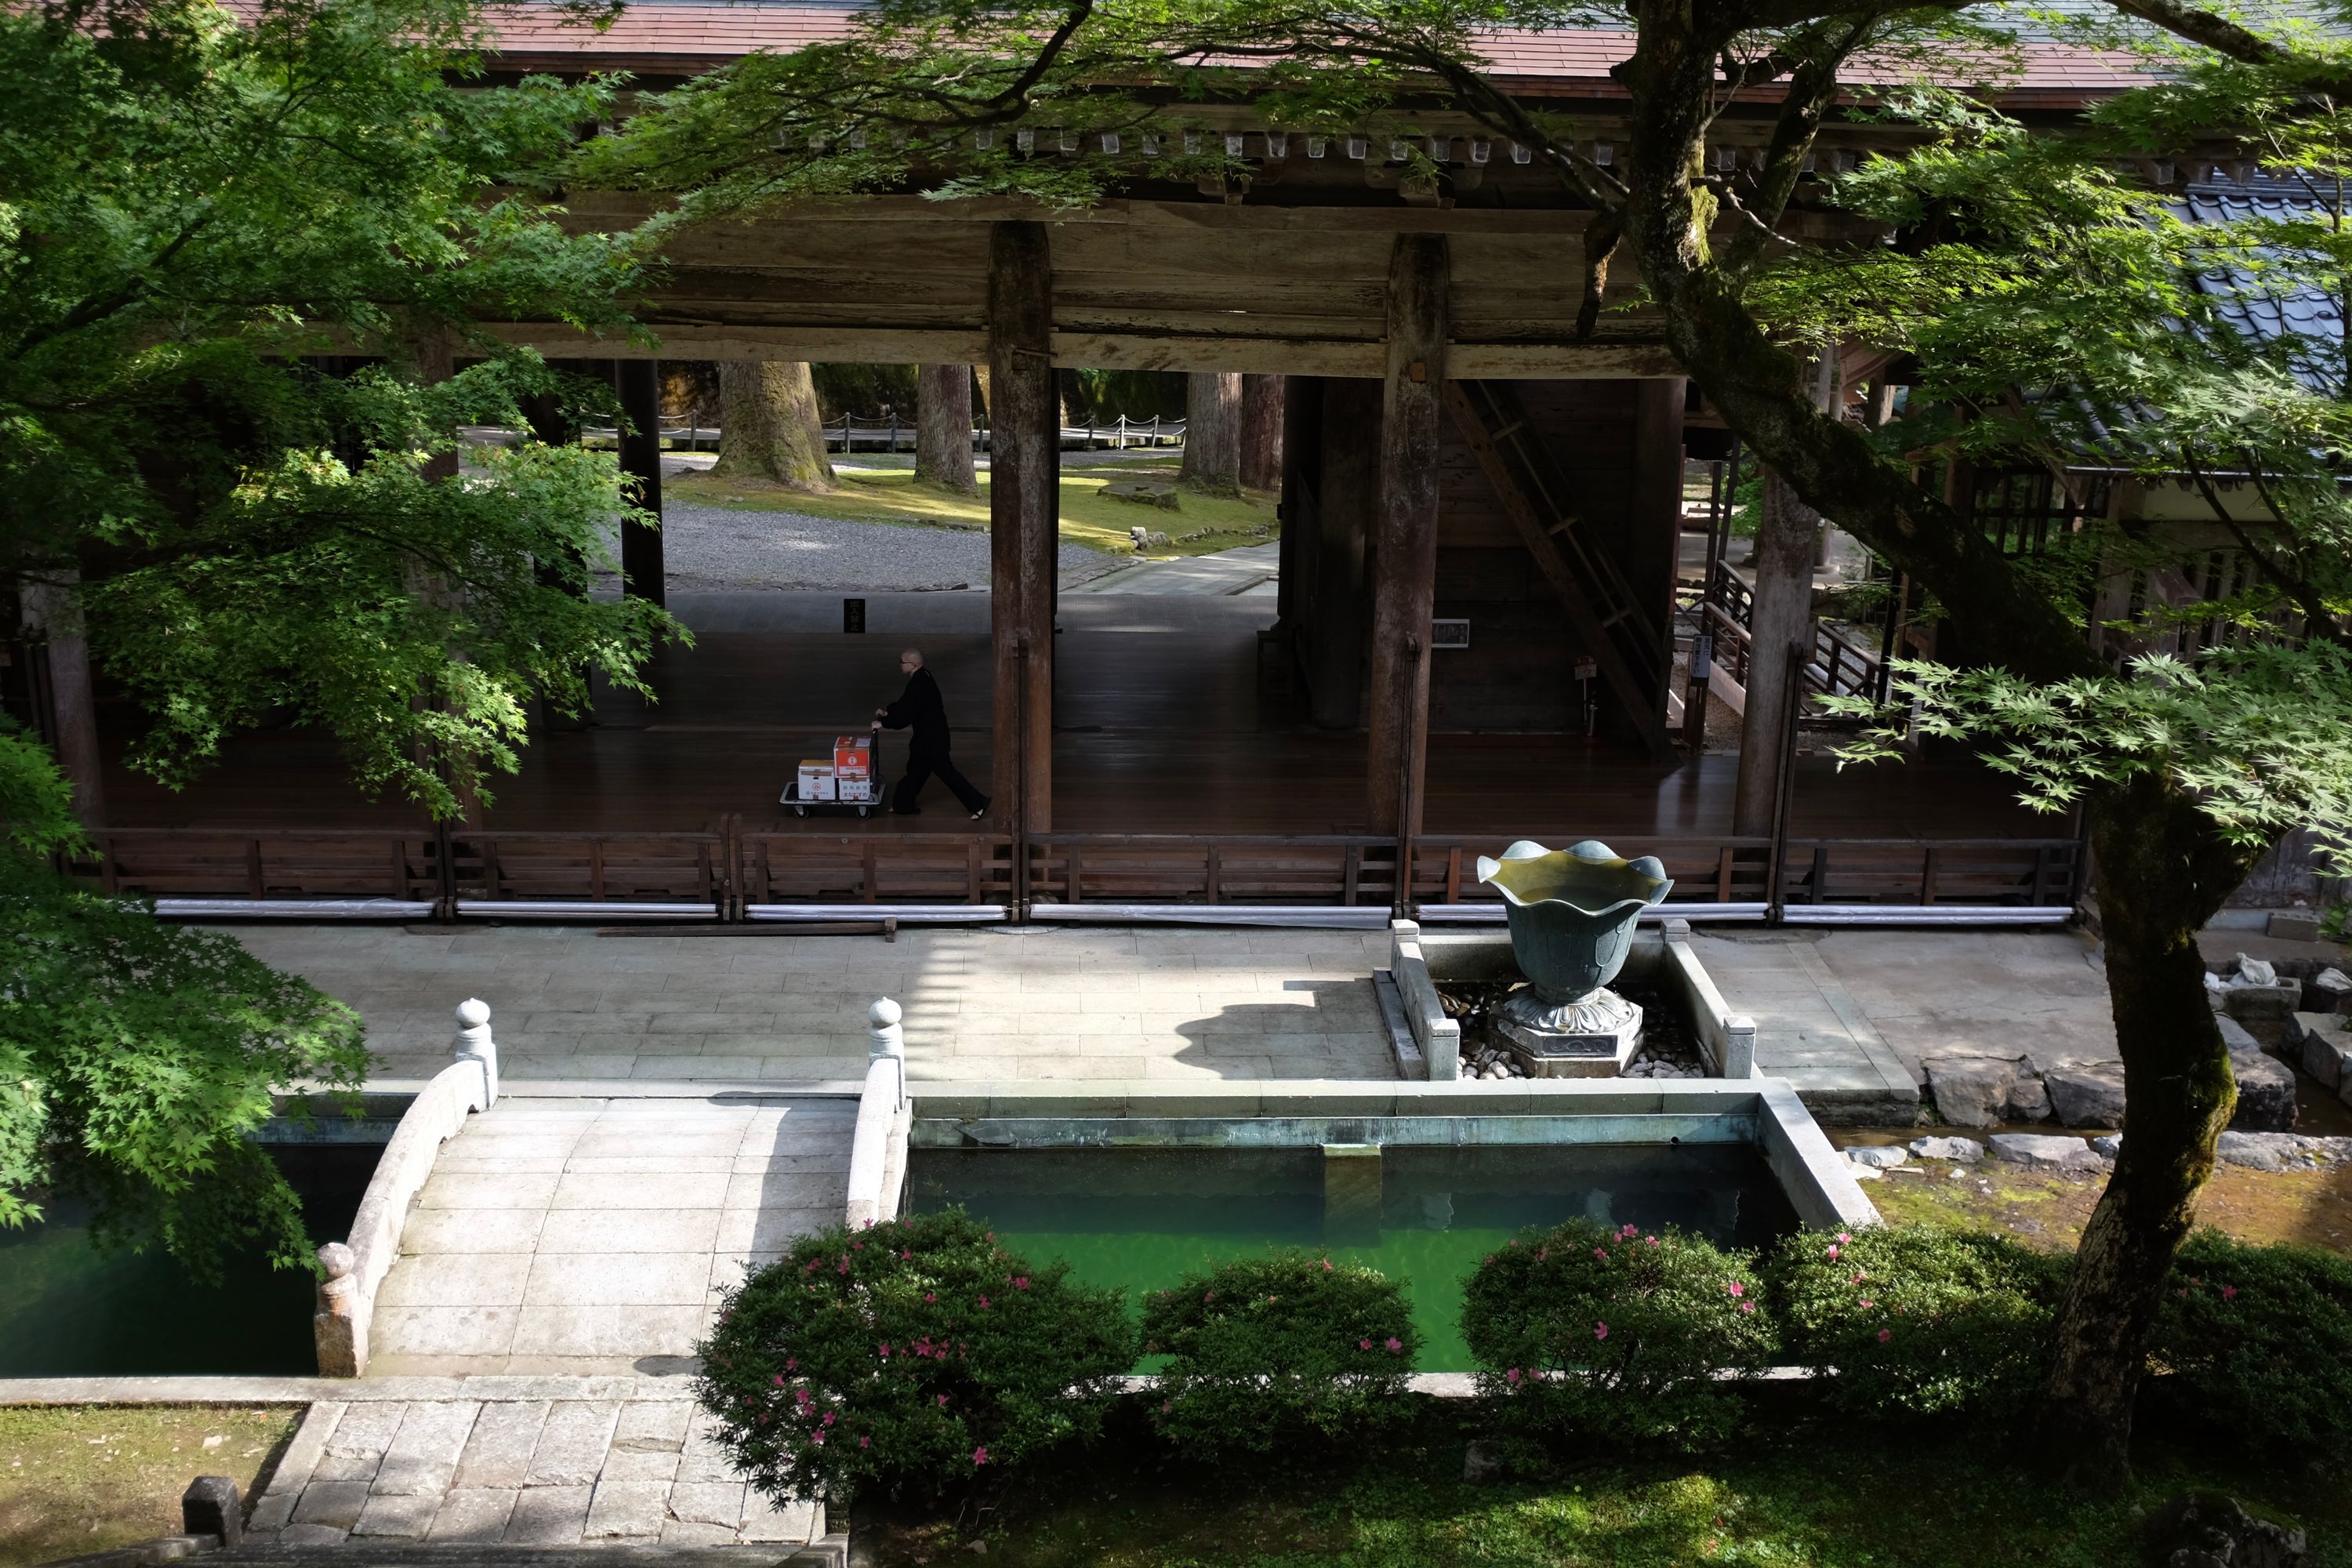 A monk pushes a cart across the courtyard of a Japanese temple.